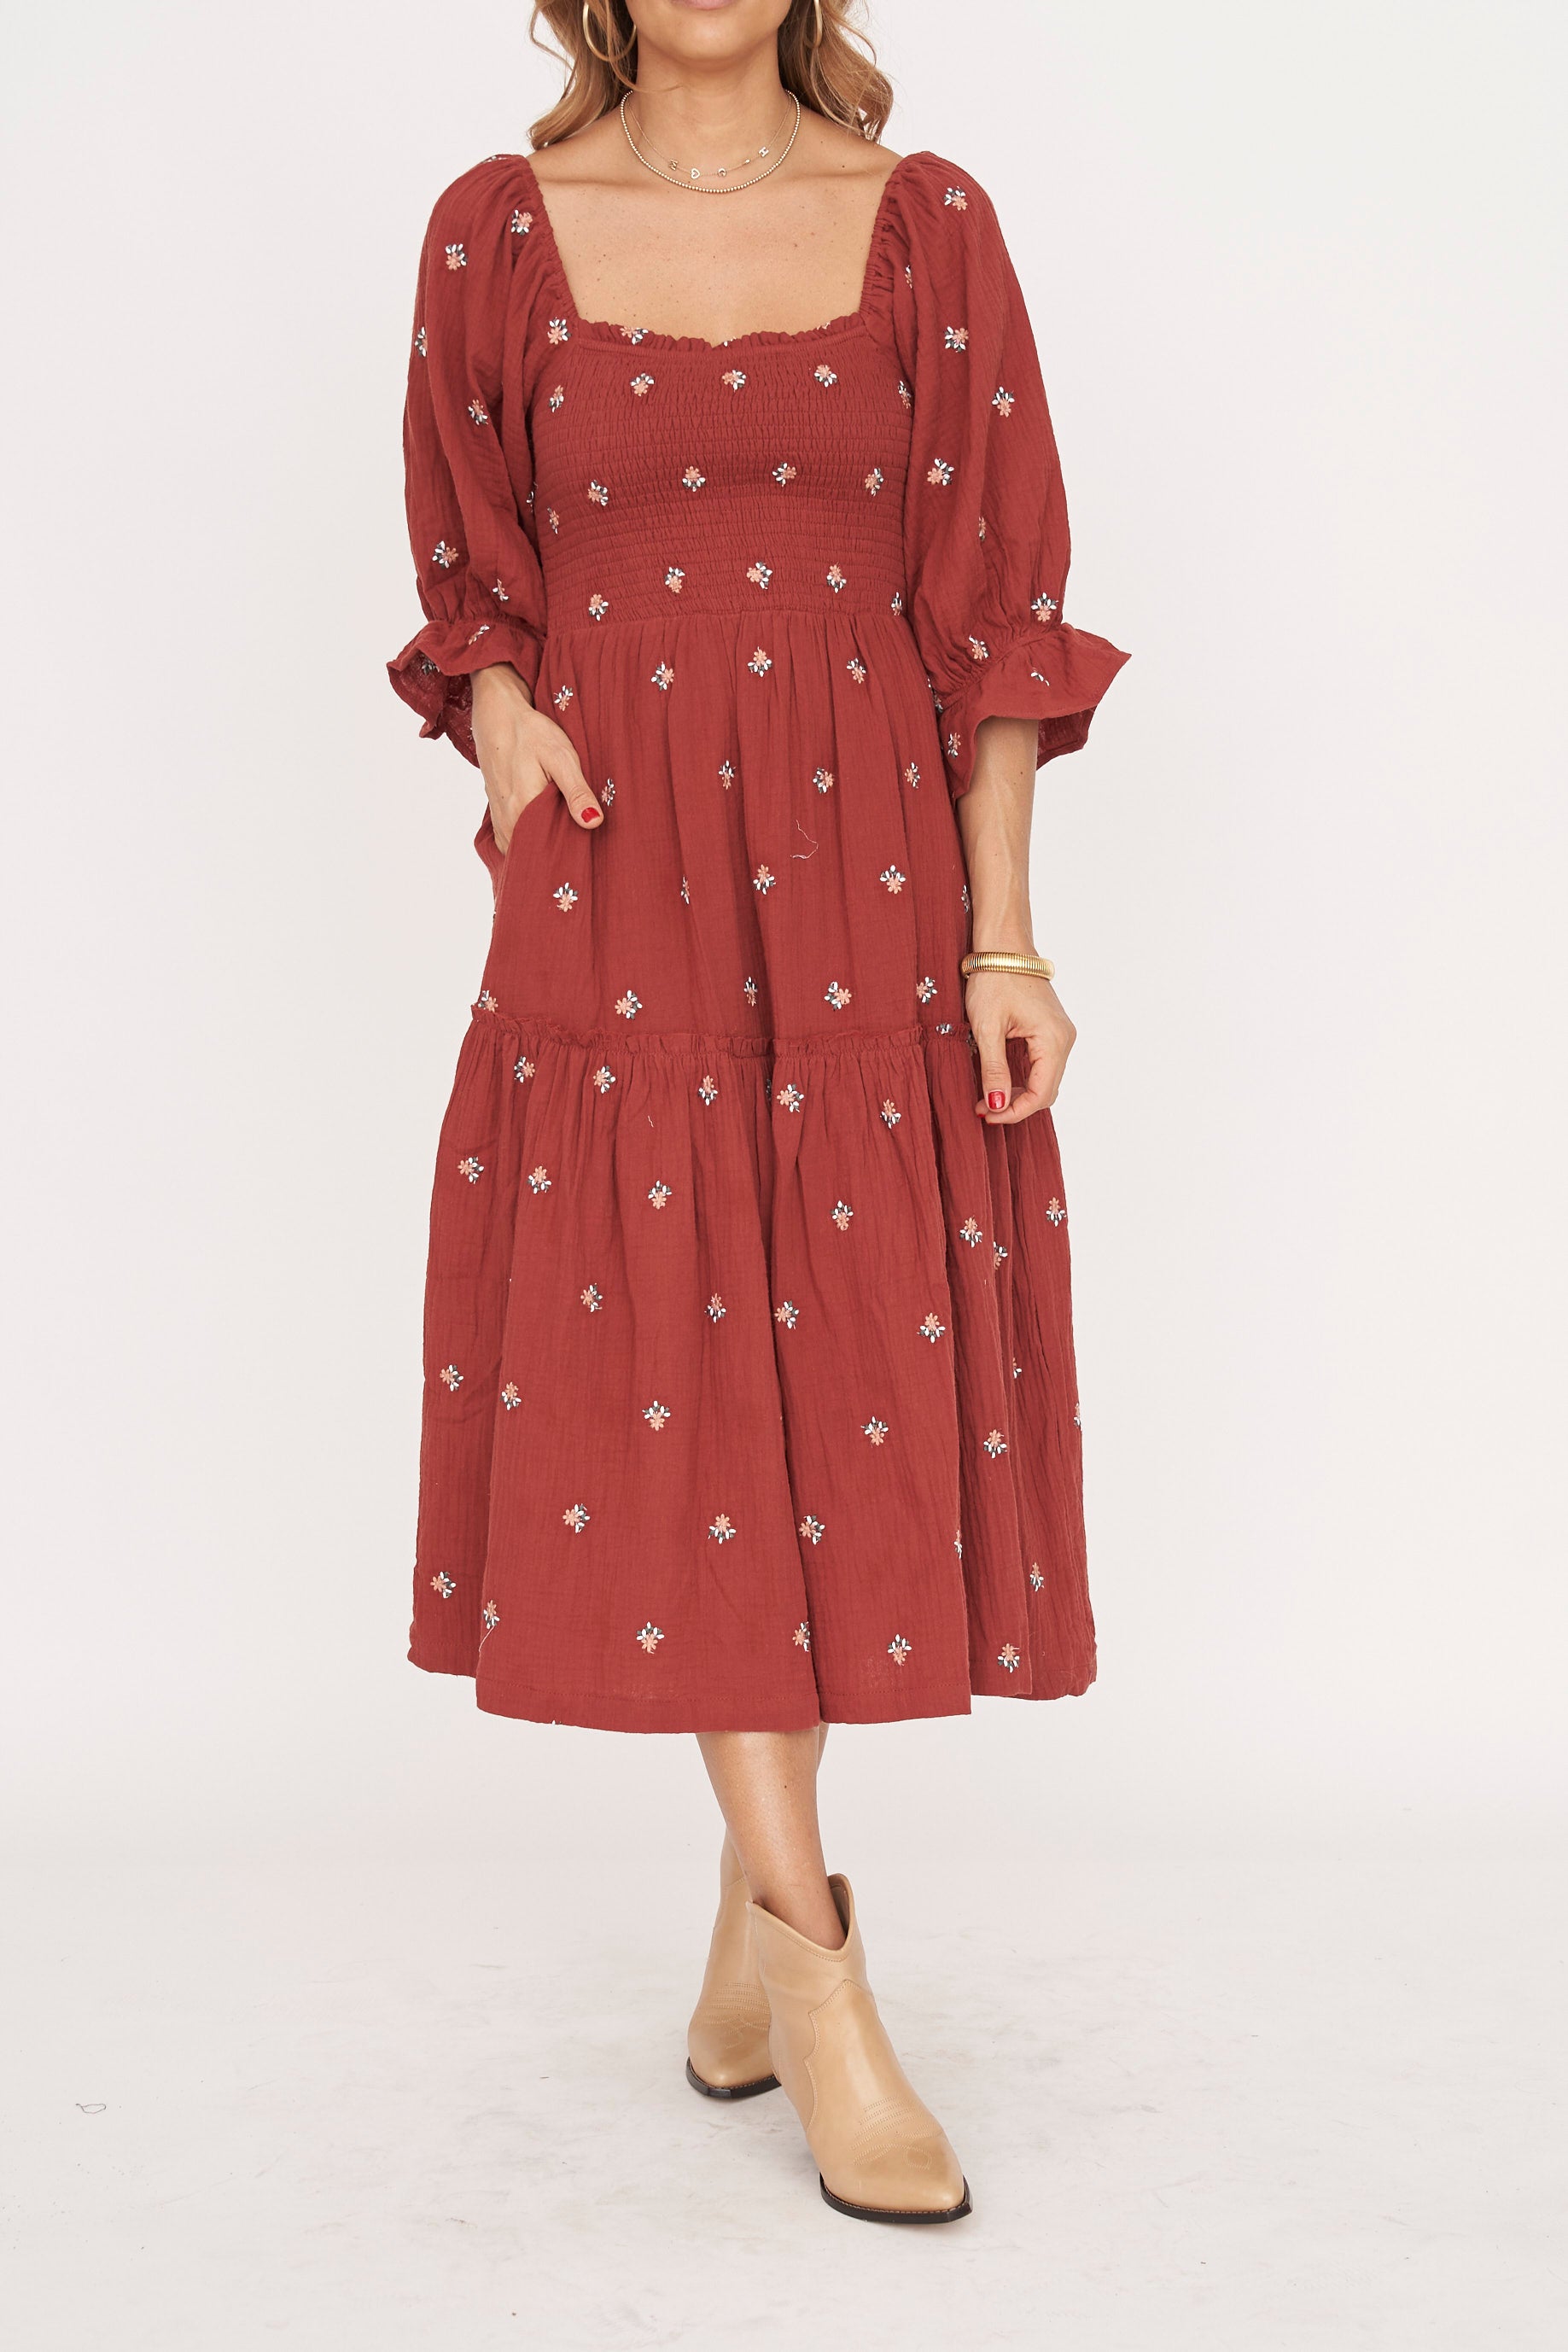 Ditzy Floral Embroidery Midi Dress